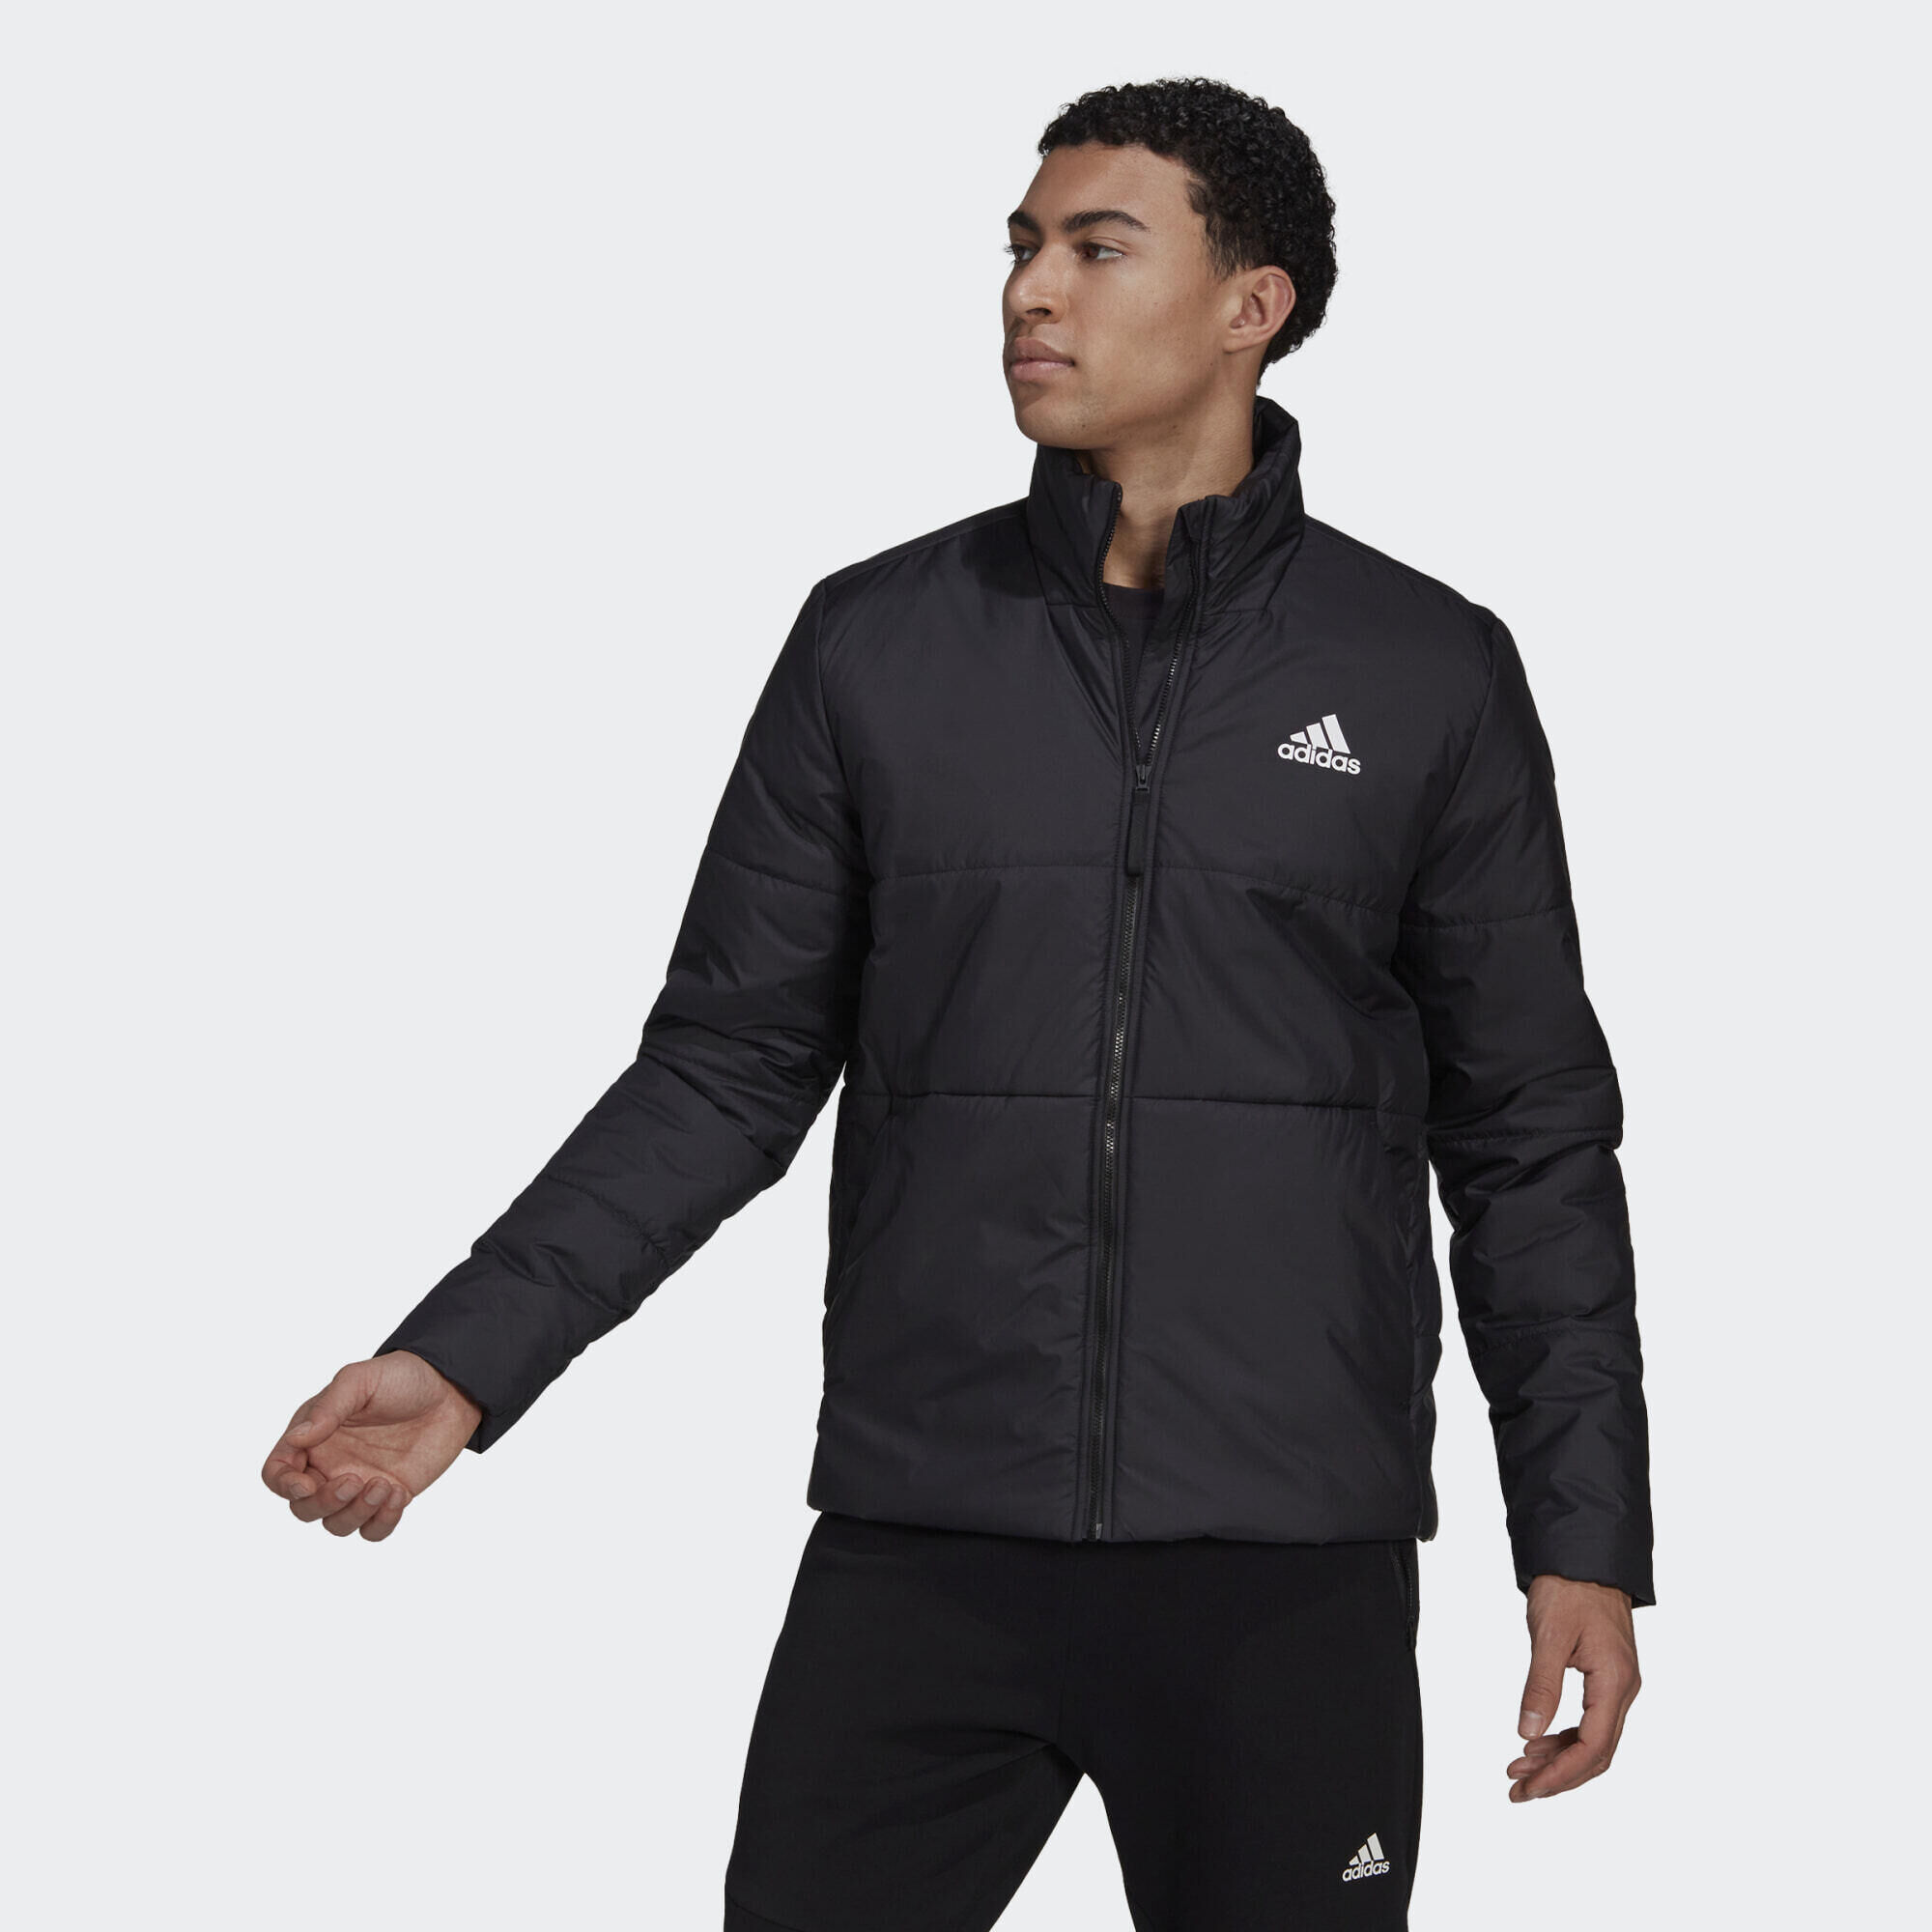 ADIDAS BSC 3-Stripes Insulated Jacket